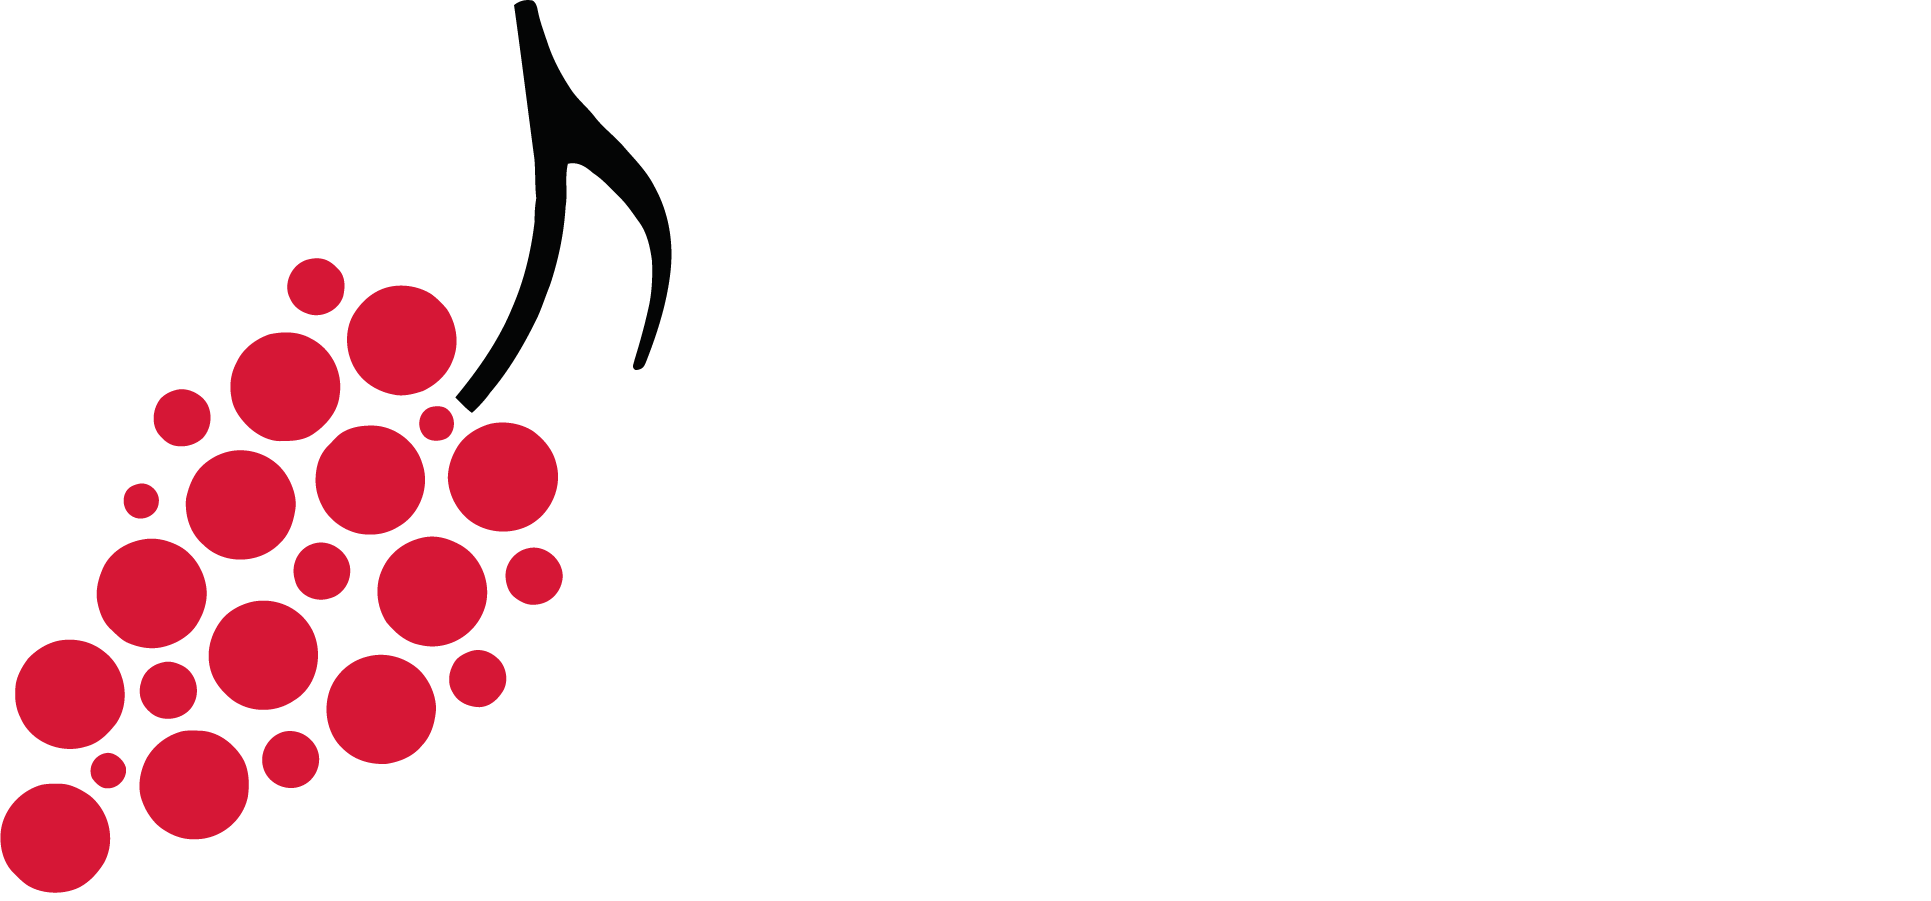 The Grooving Grapes